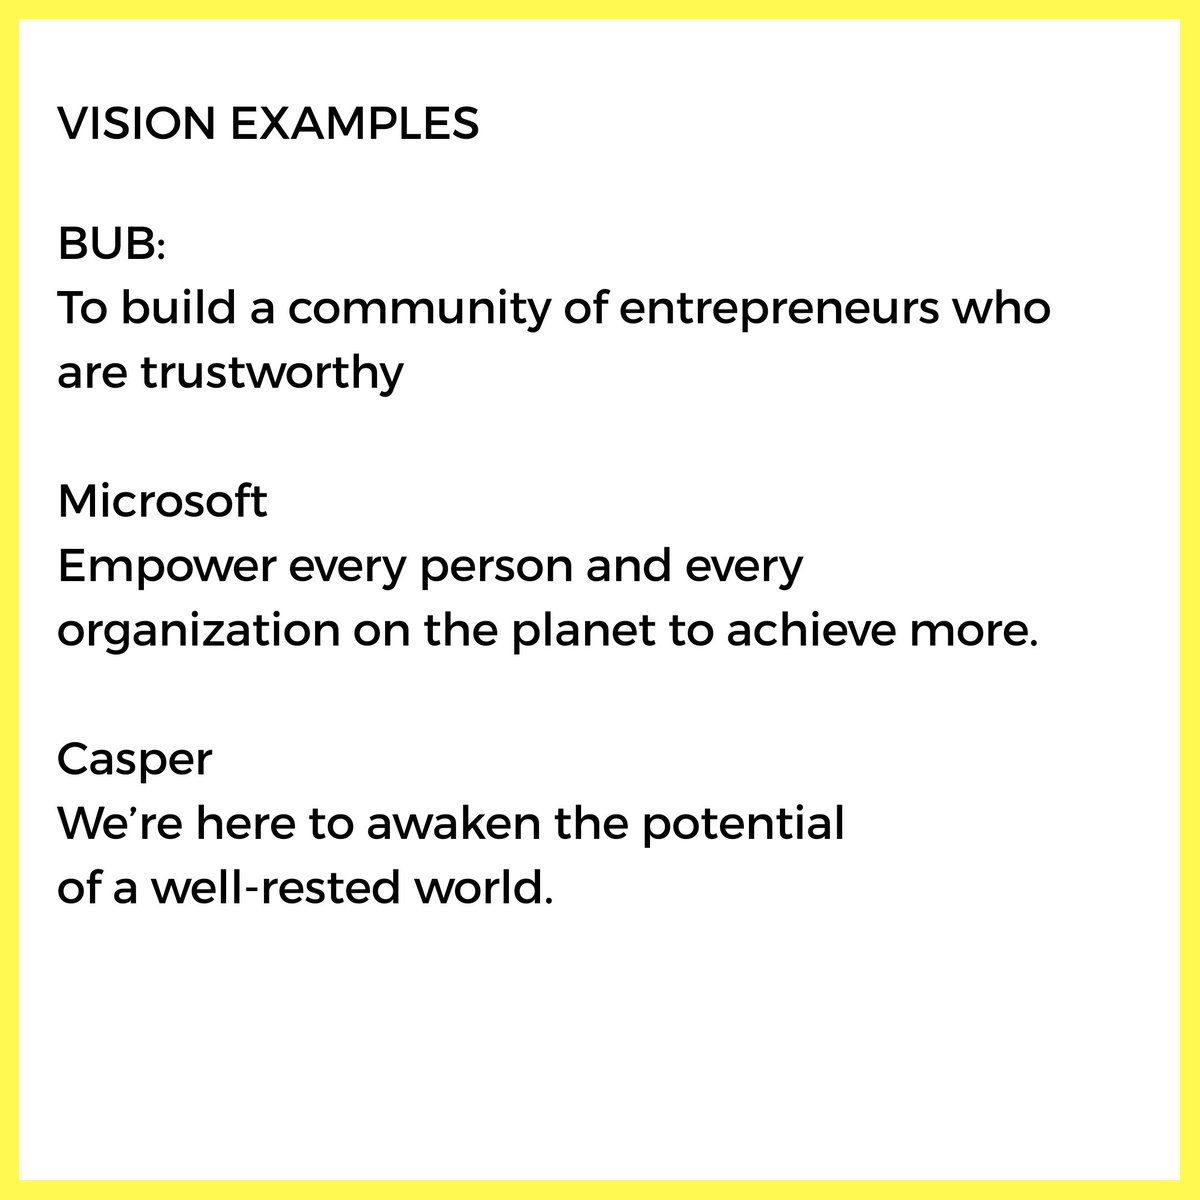 Check picture for examples of vision